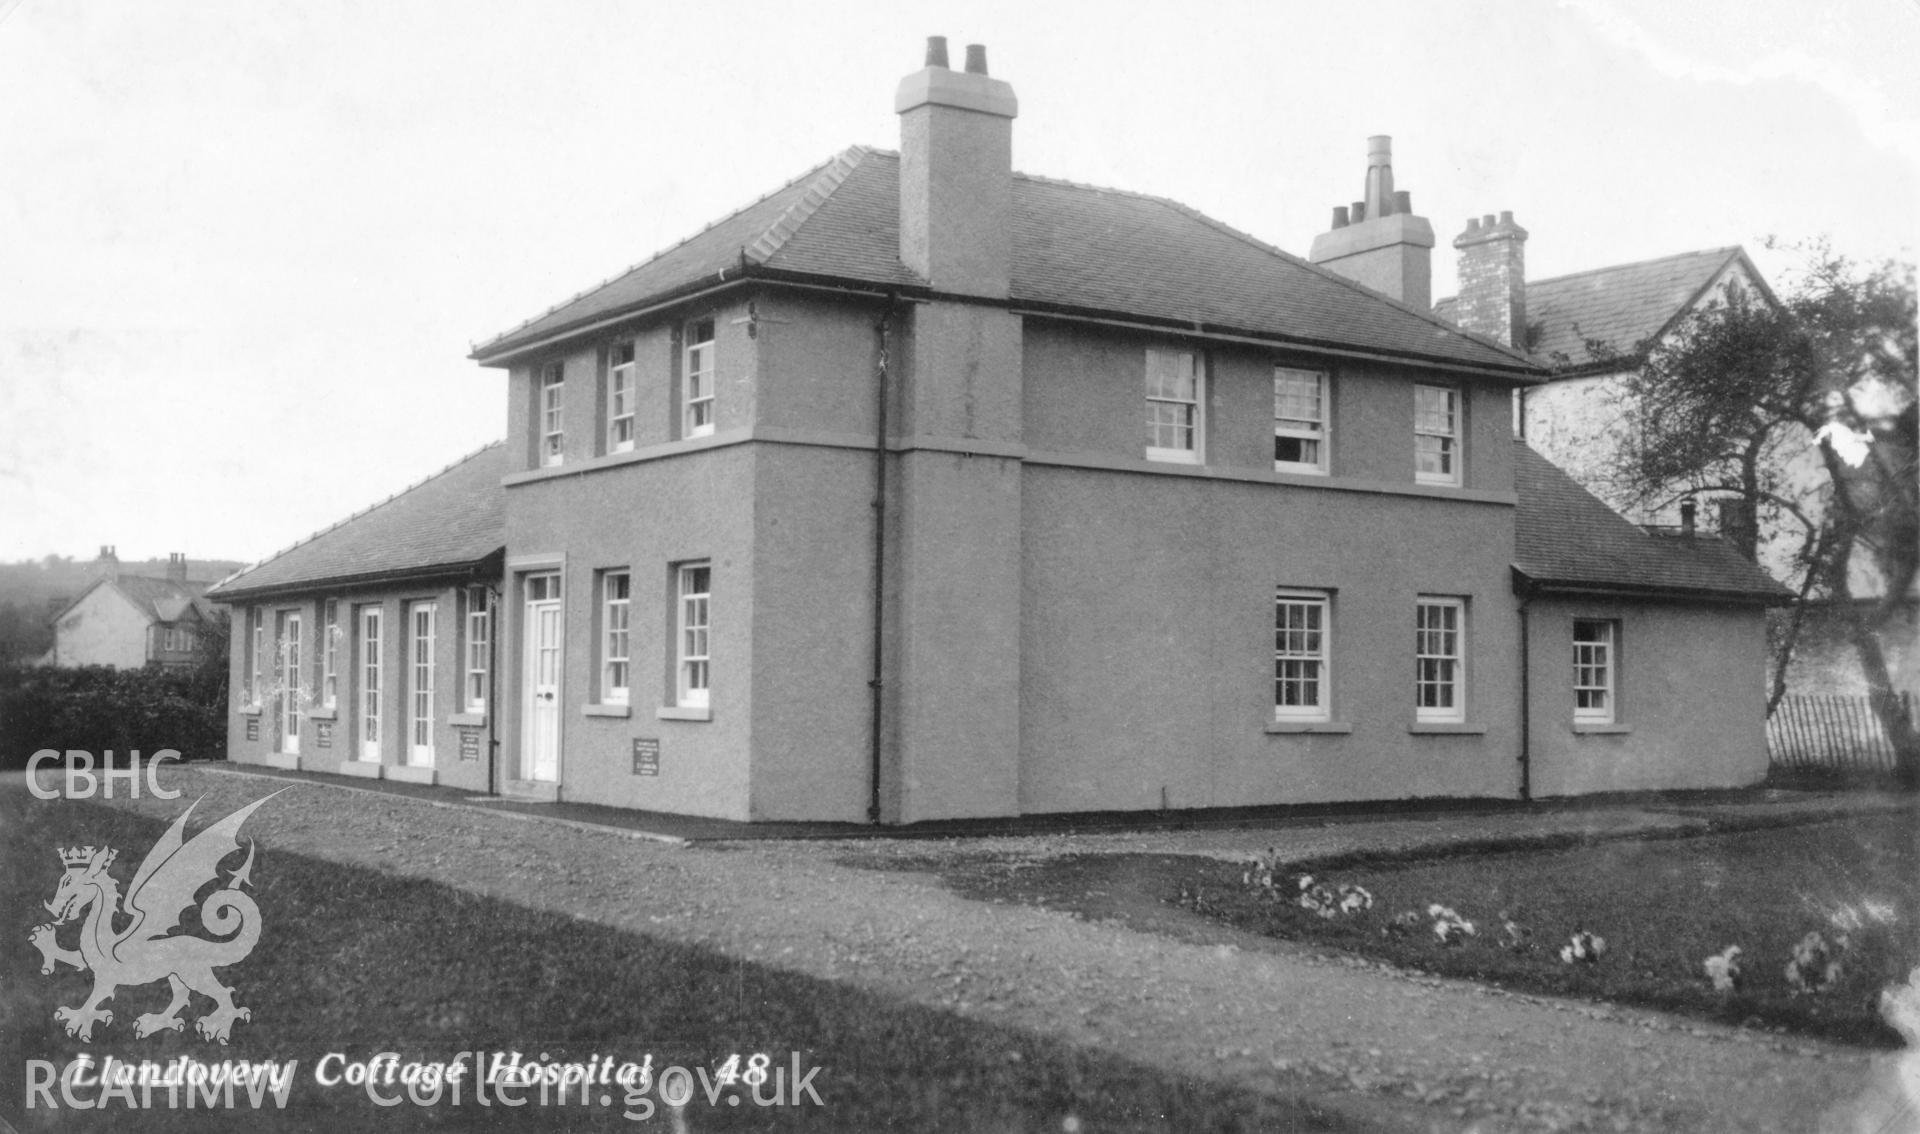 Copy of b/w postcard of Llandovery Cottage Hospital, copied from original loaned by Thomas Lloyd.  Copy negative held.